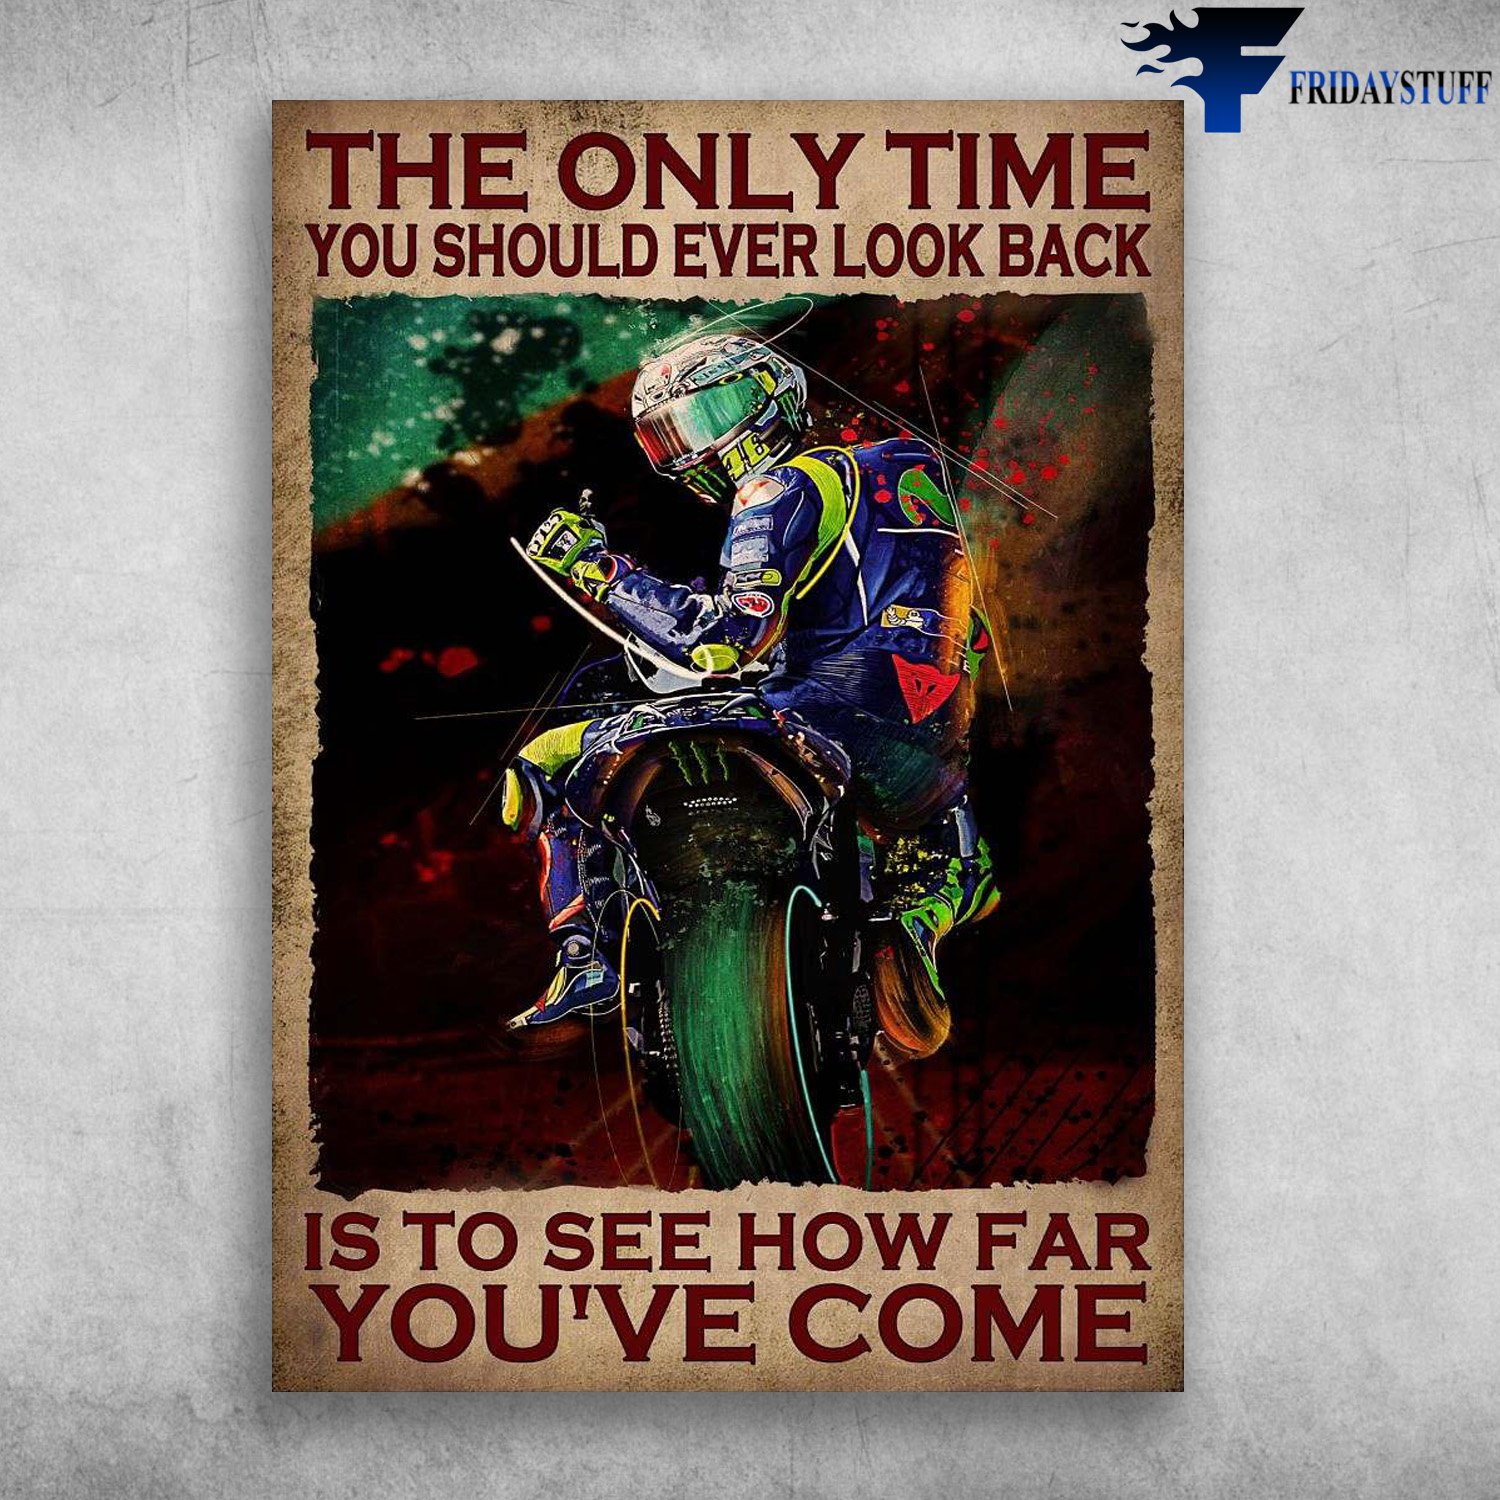 Racer Look Back, Motorcycle Man - The Only Time, You Should Ever Look Back, Is To See How Far You've Come